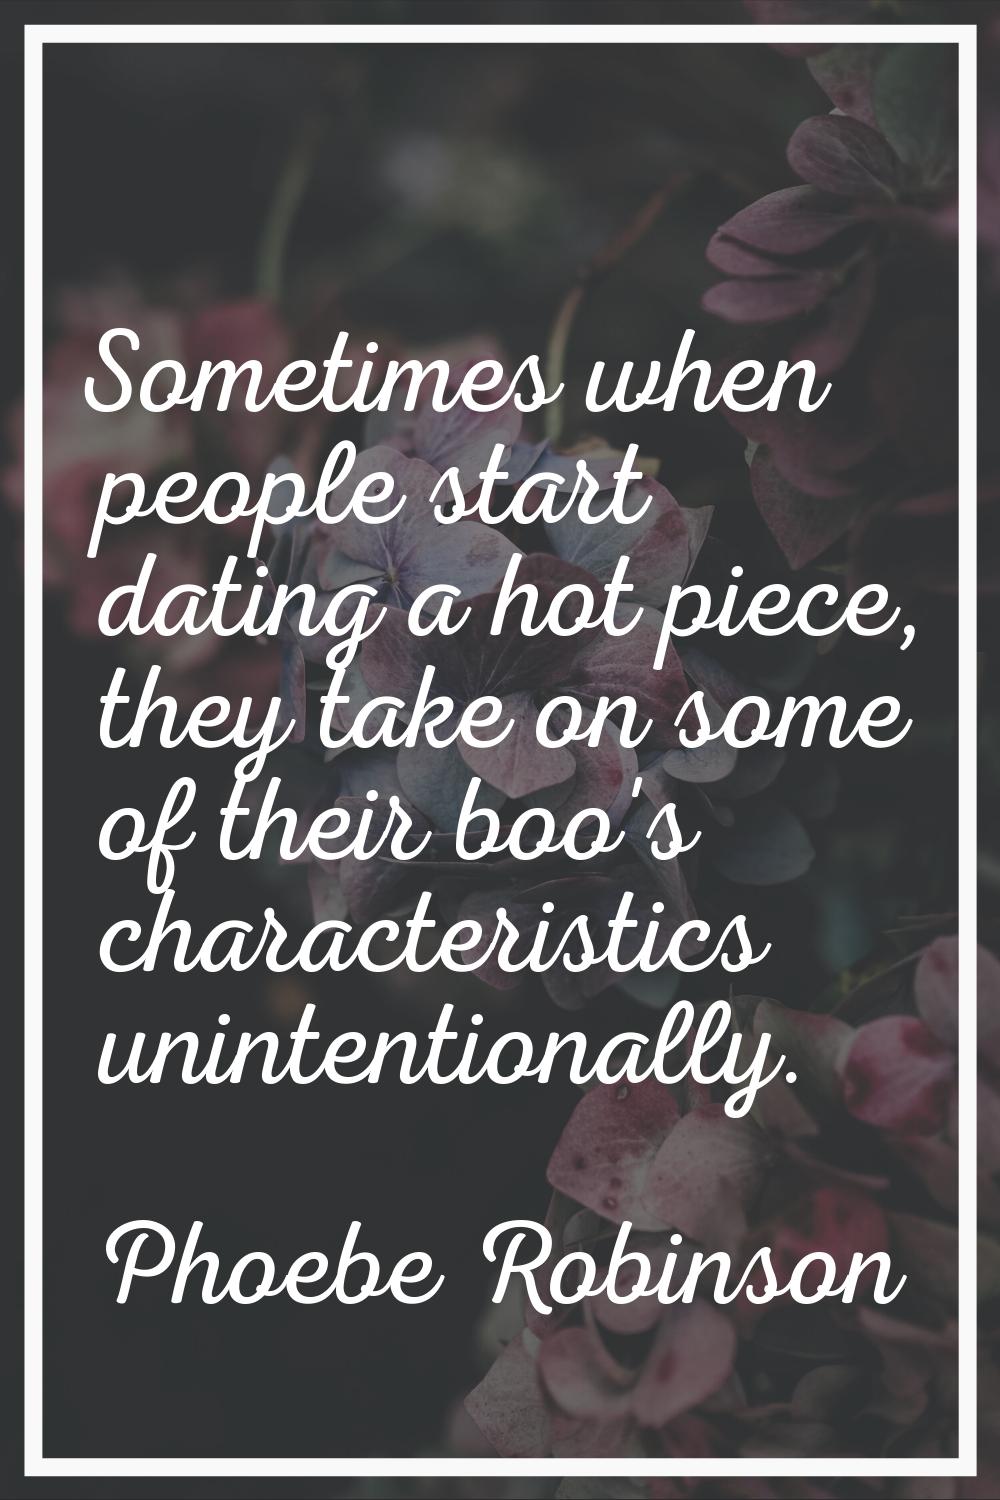 Sometimes when people start dating a hot piece, they take on some of their boo's characteristics un